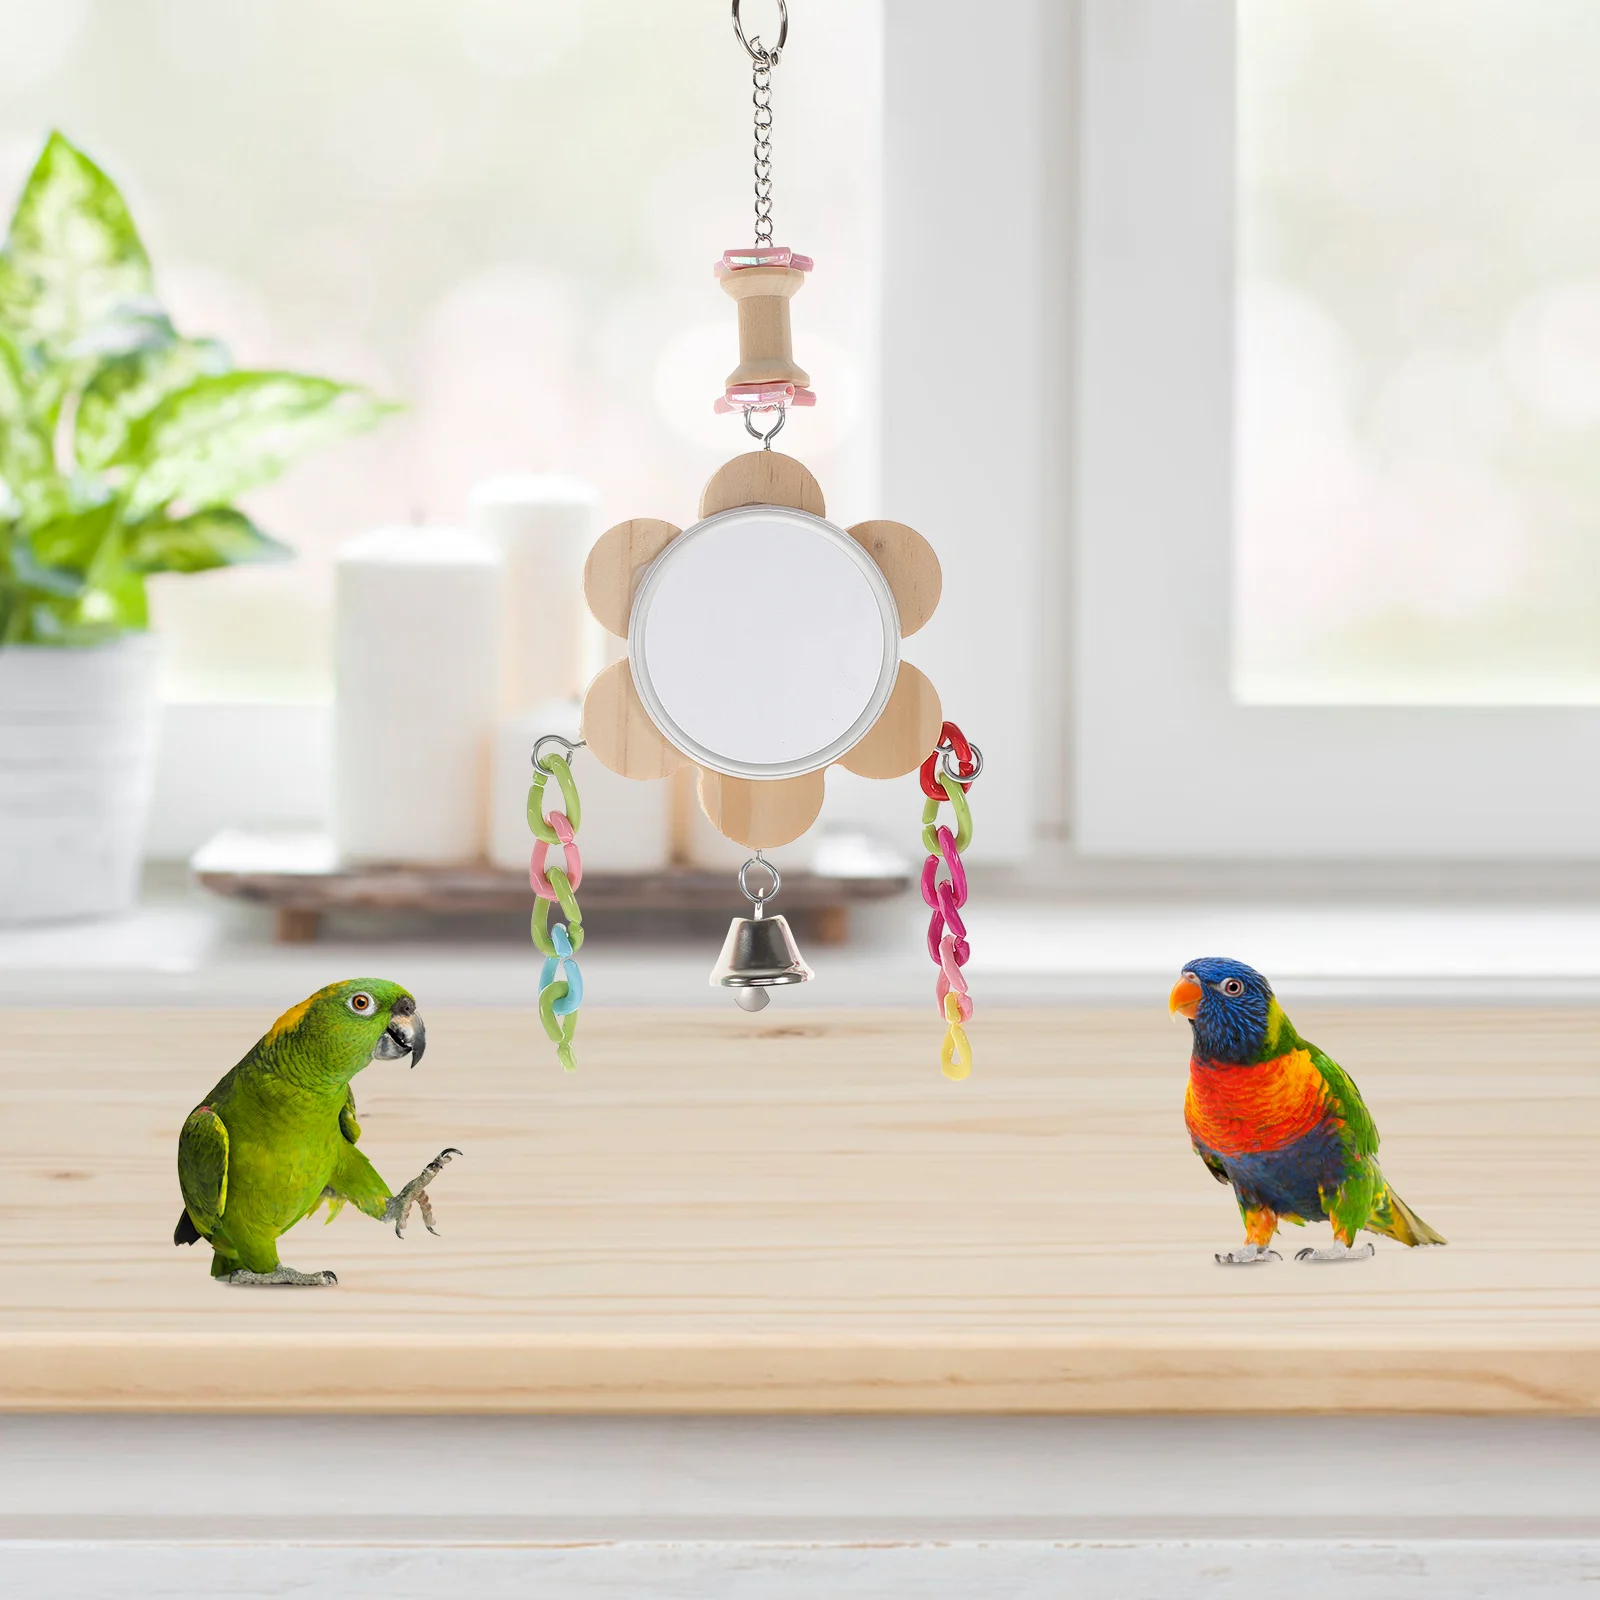 

Bird Mirror Swing Hanging Pet Toys Chewing Parrots Toy Cage Birds Parrot Perches Perch Climbing Cockatiel Hammock Wooden Budgie